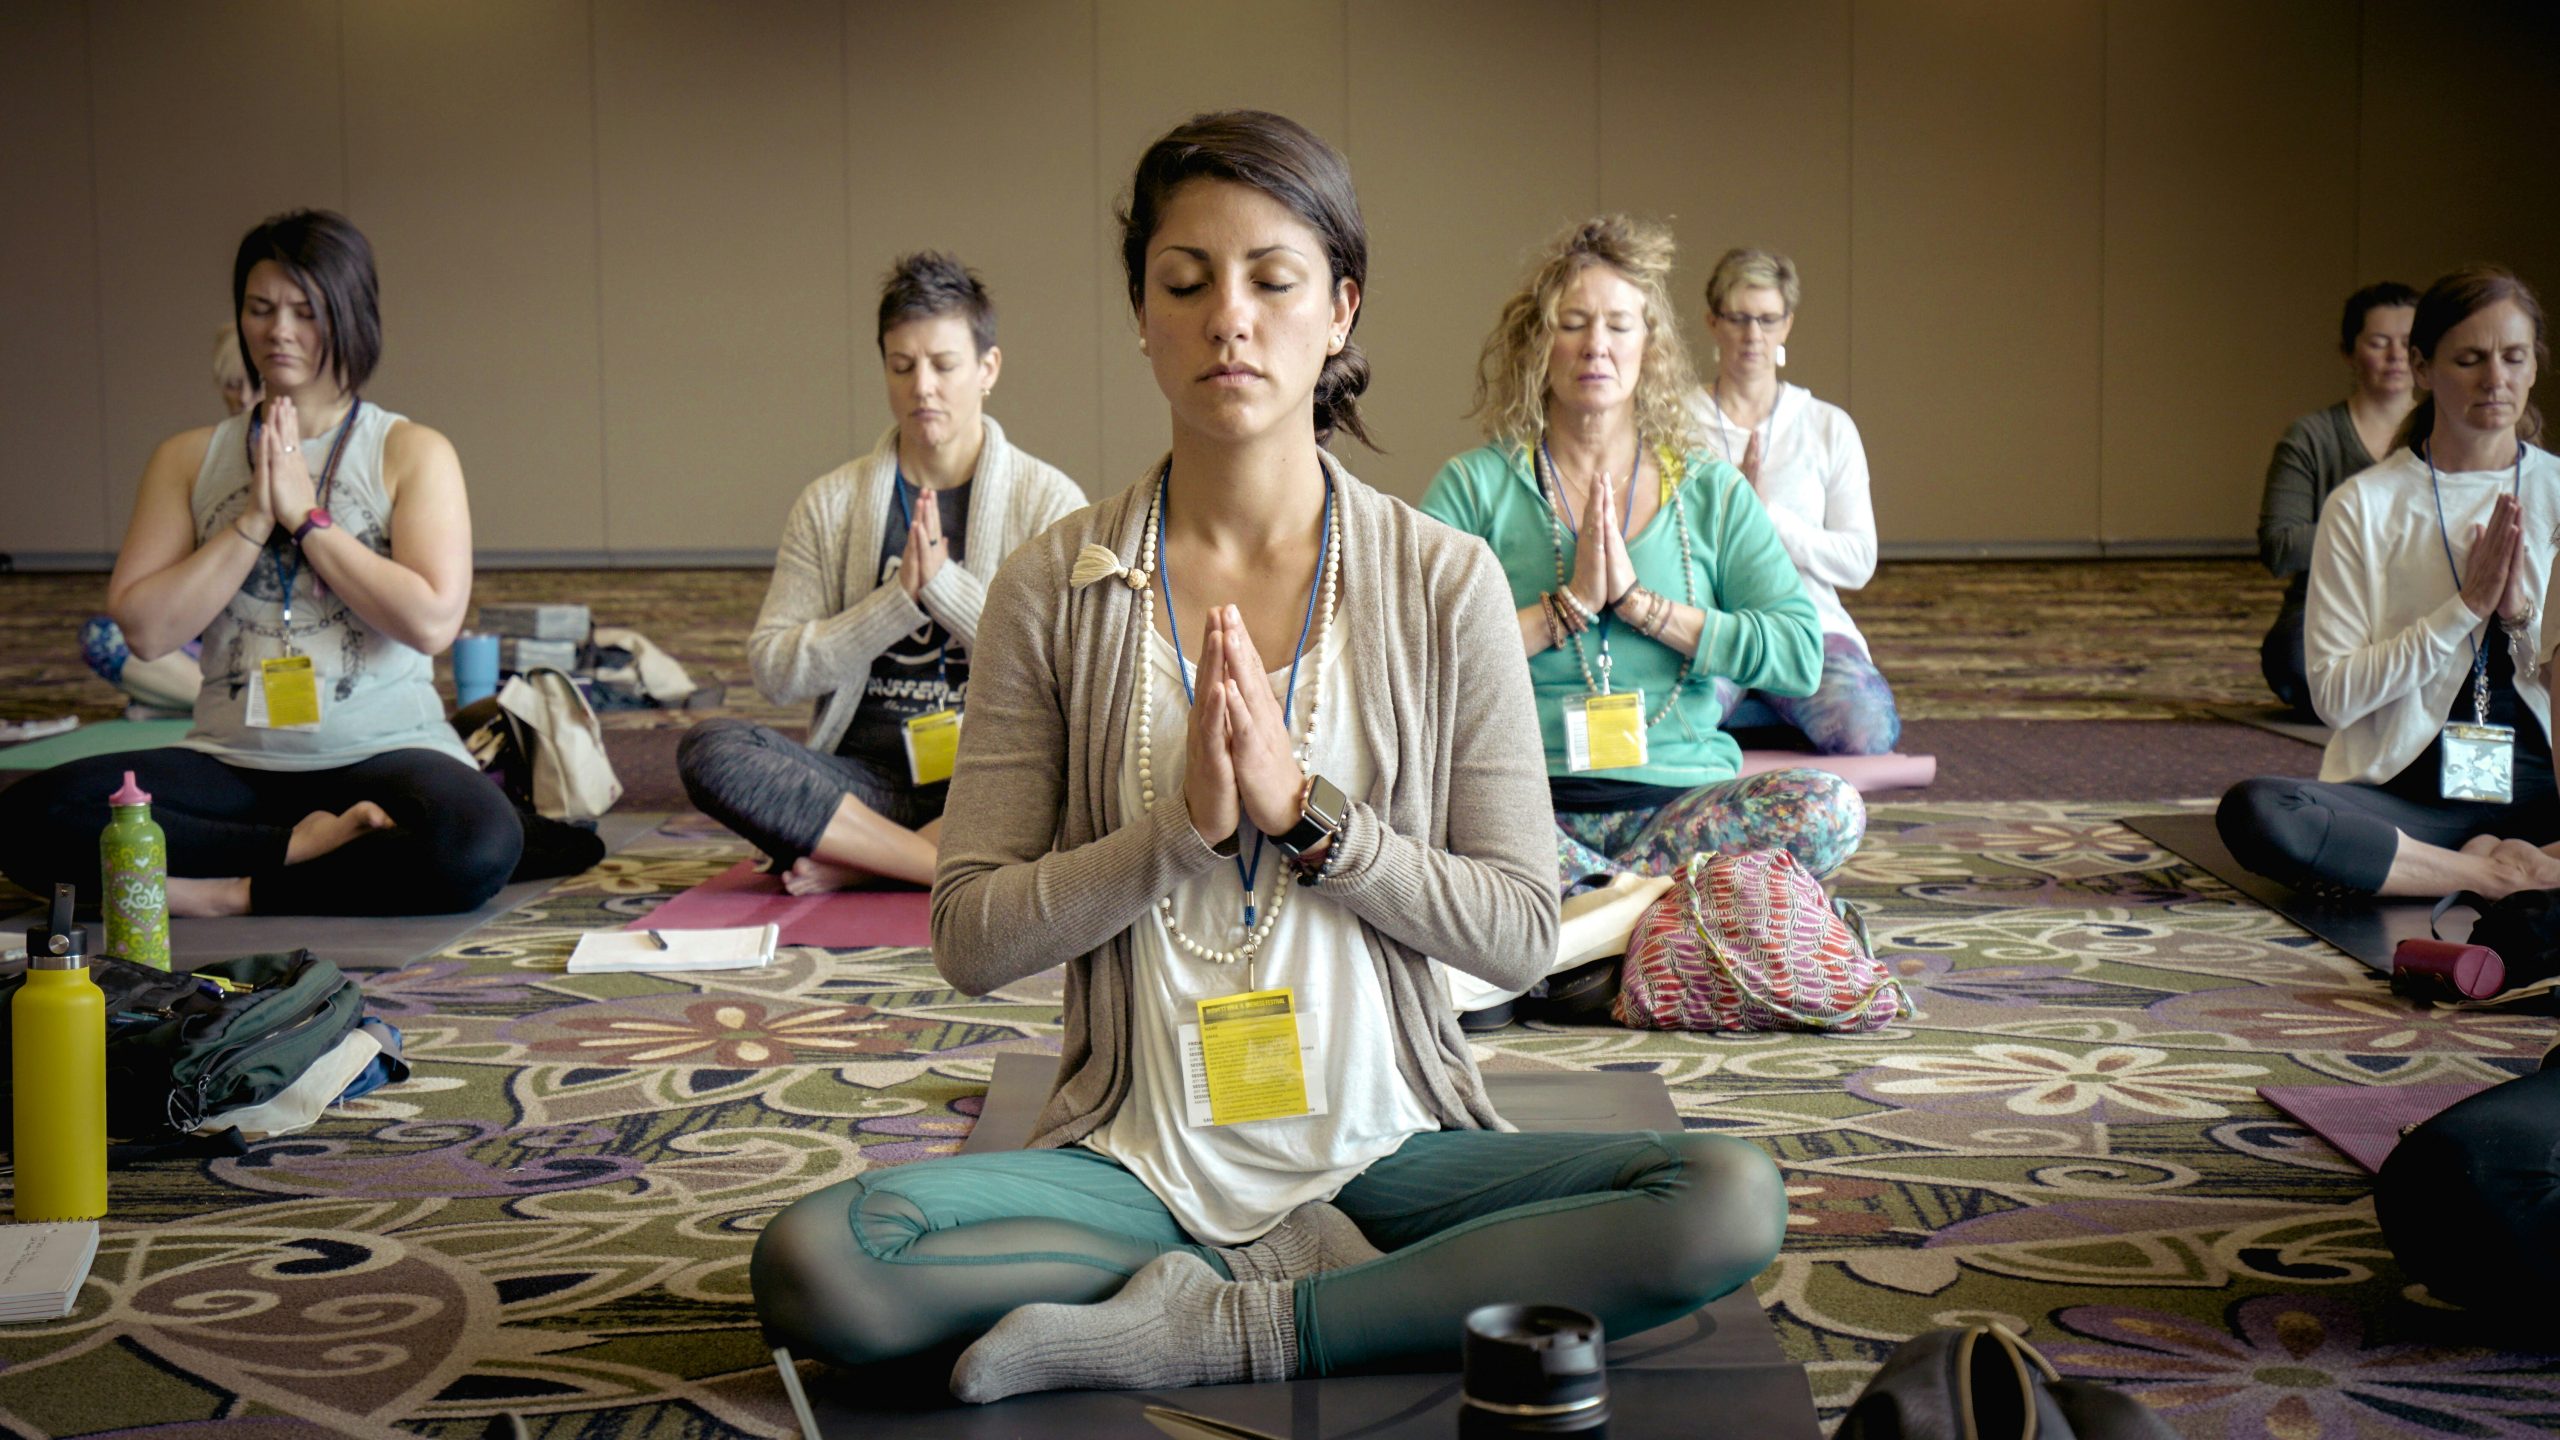 find your inner peace and serenity at our unique yoga and meditation retreats. let go of stress and discover a new level of mindfulness in an idyllic setting.